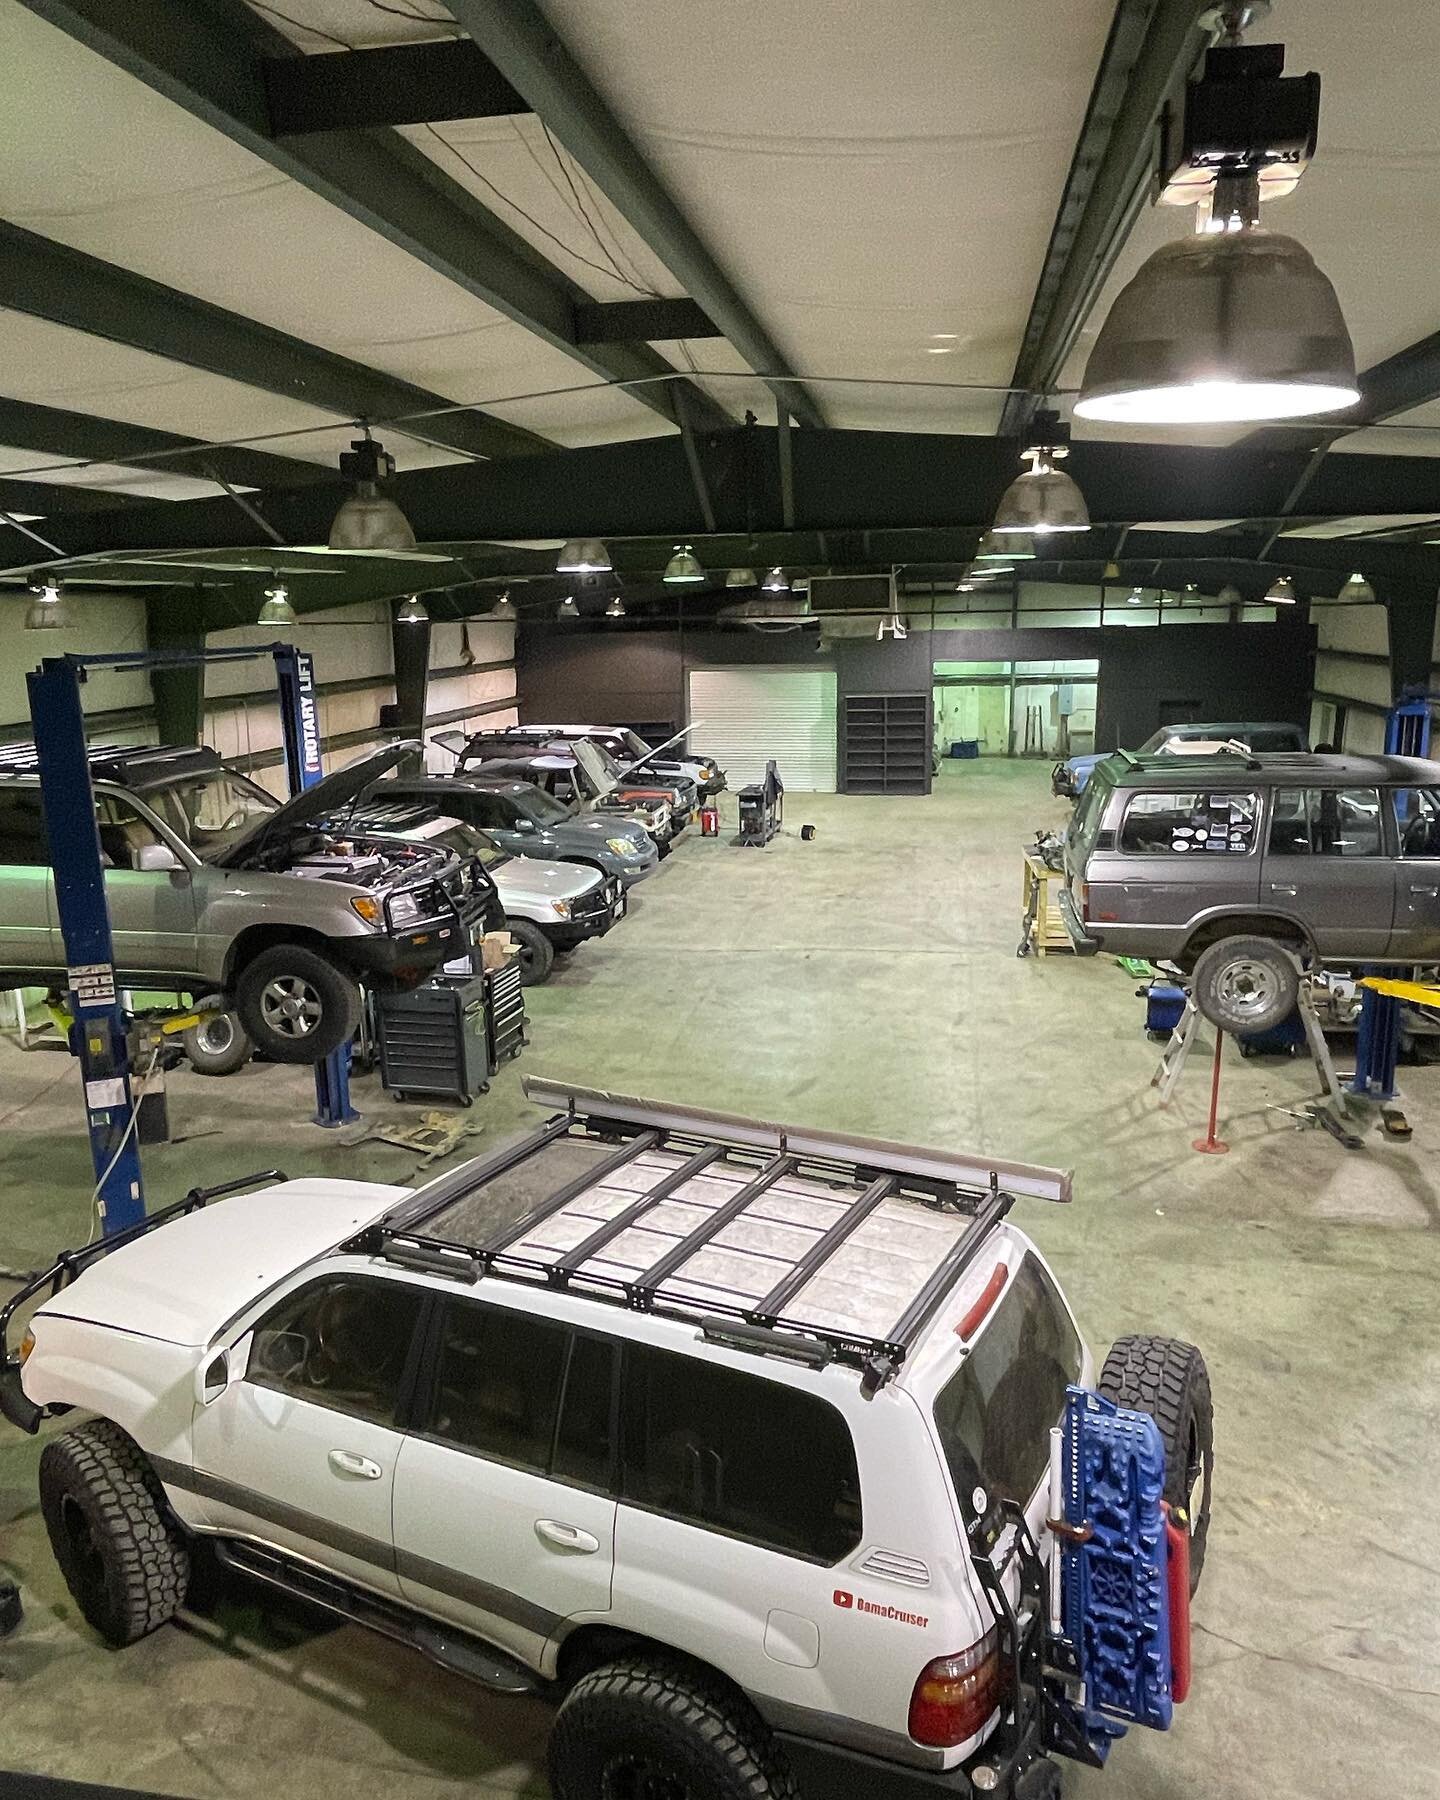 We haven&rsquo;t posted much lately. We&rsquo;re getting settled into the new shop: lifts installed, organizing parts, tools, fluids, etc. Thank you to everyone for your continued support of OTM, we cannot do it without you! 

#toyota #landcruiser #t